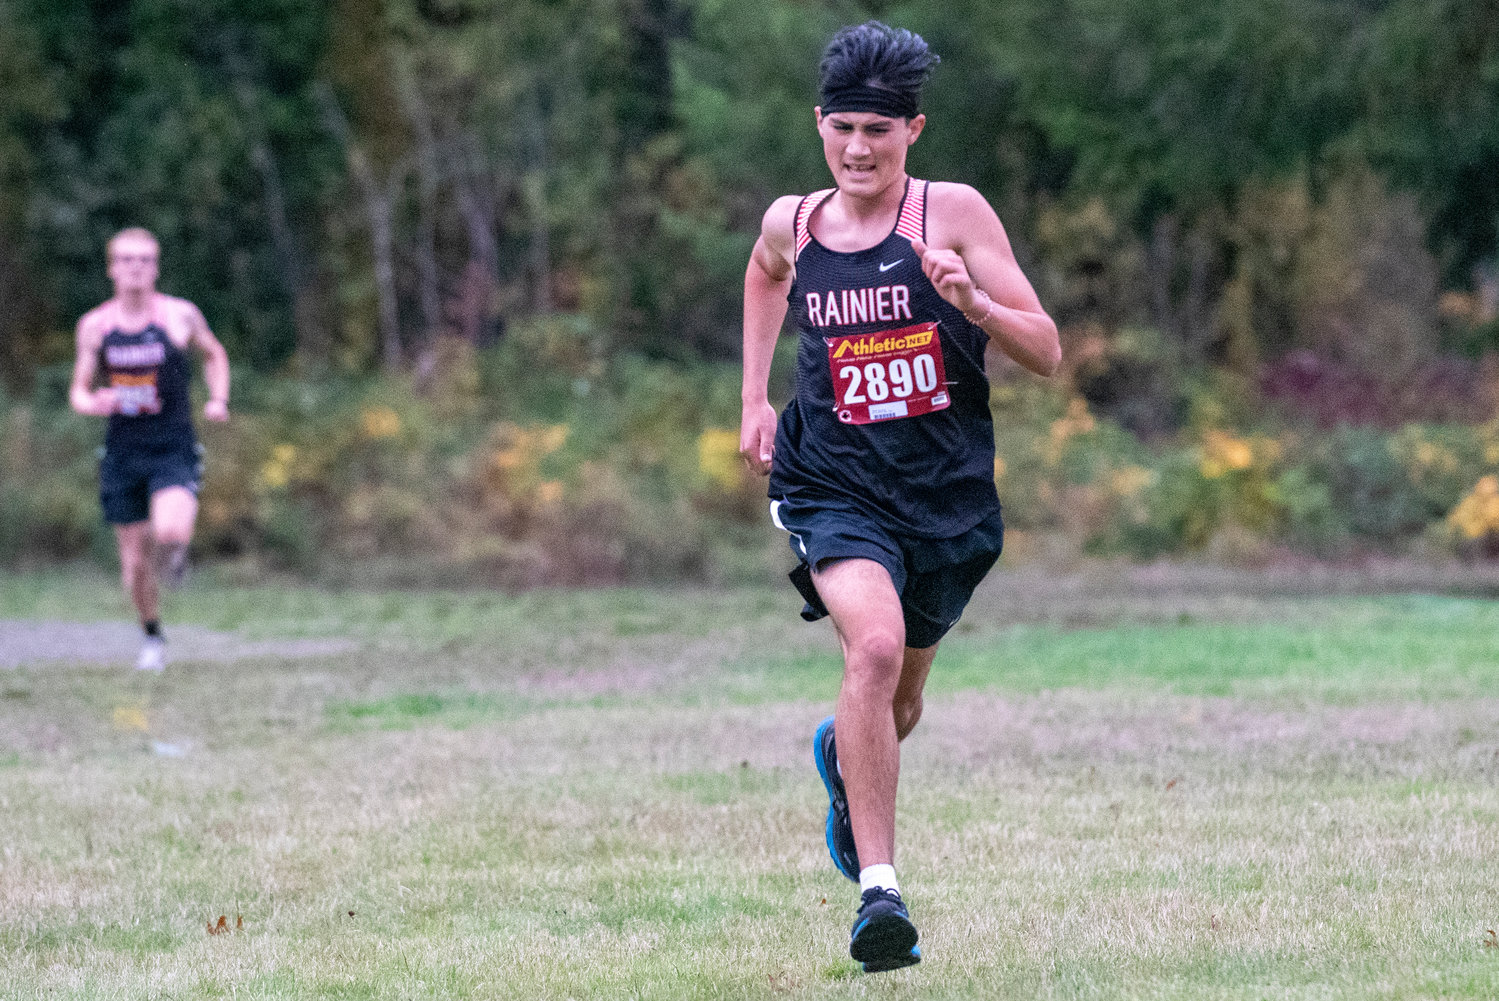 Rainier senior Dylan Davis sprints toward the finish line to claim first place at the 2B Central League boys cross country championships in Onalaska on Thursday, Oct. 21, 2021.